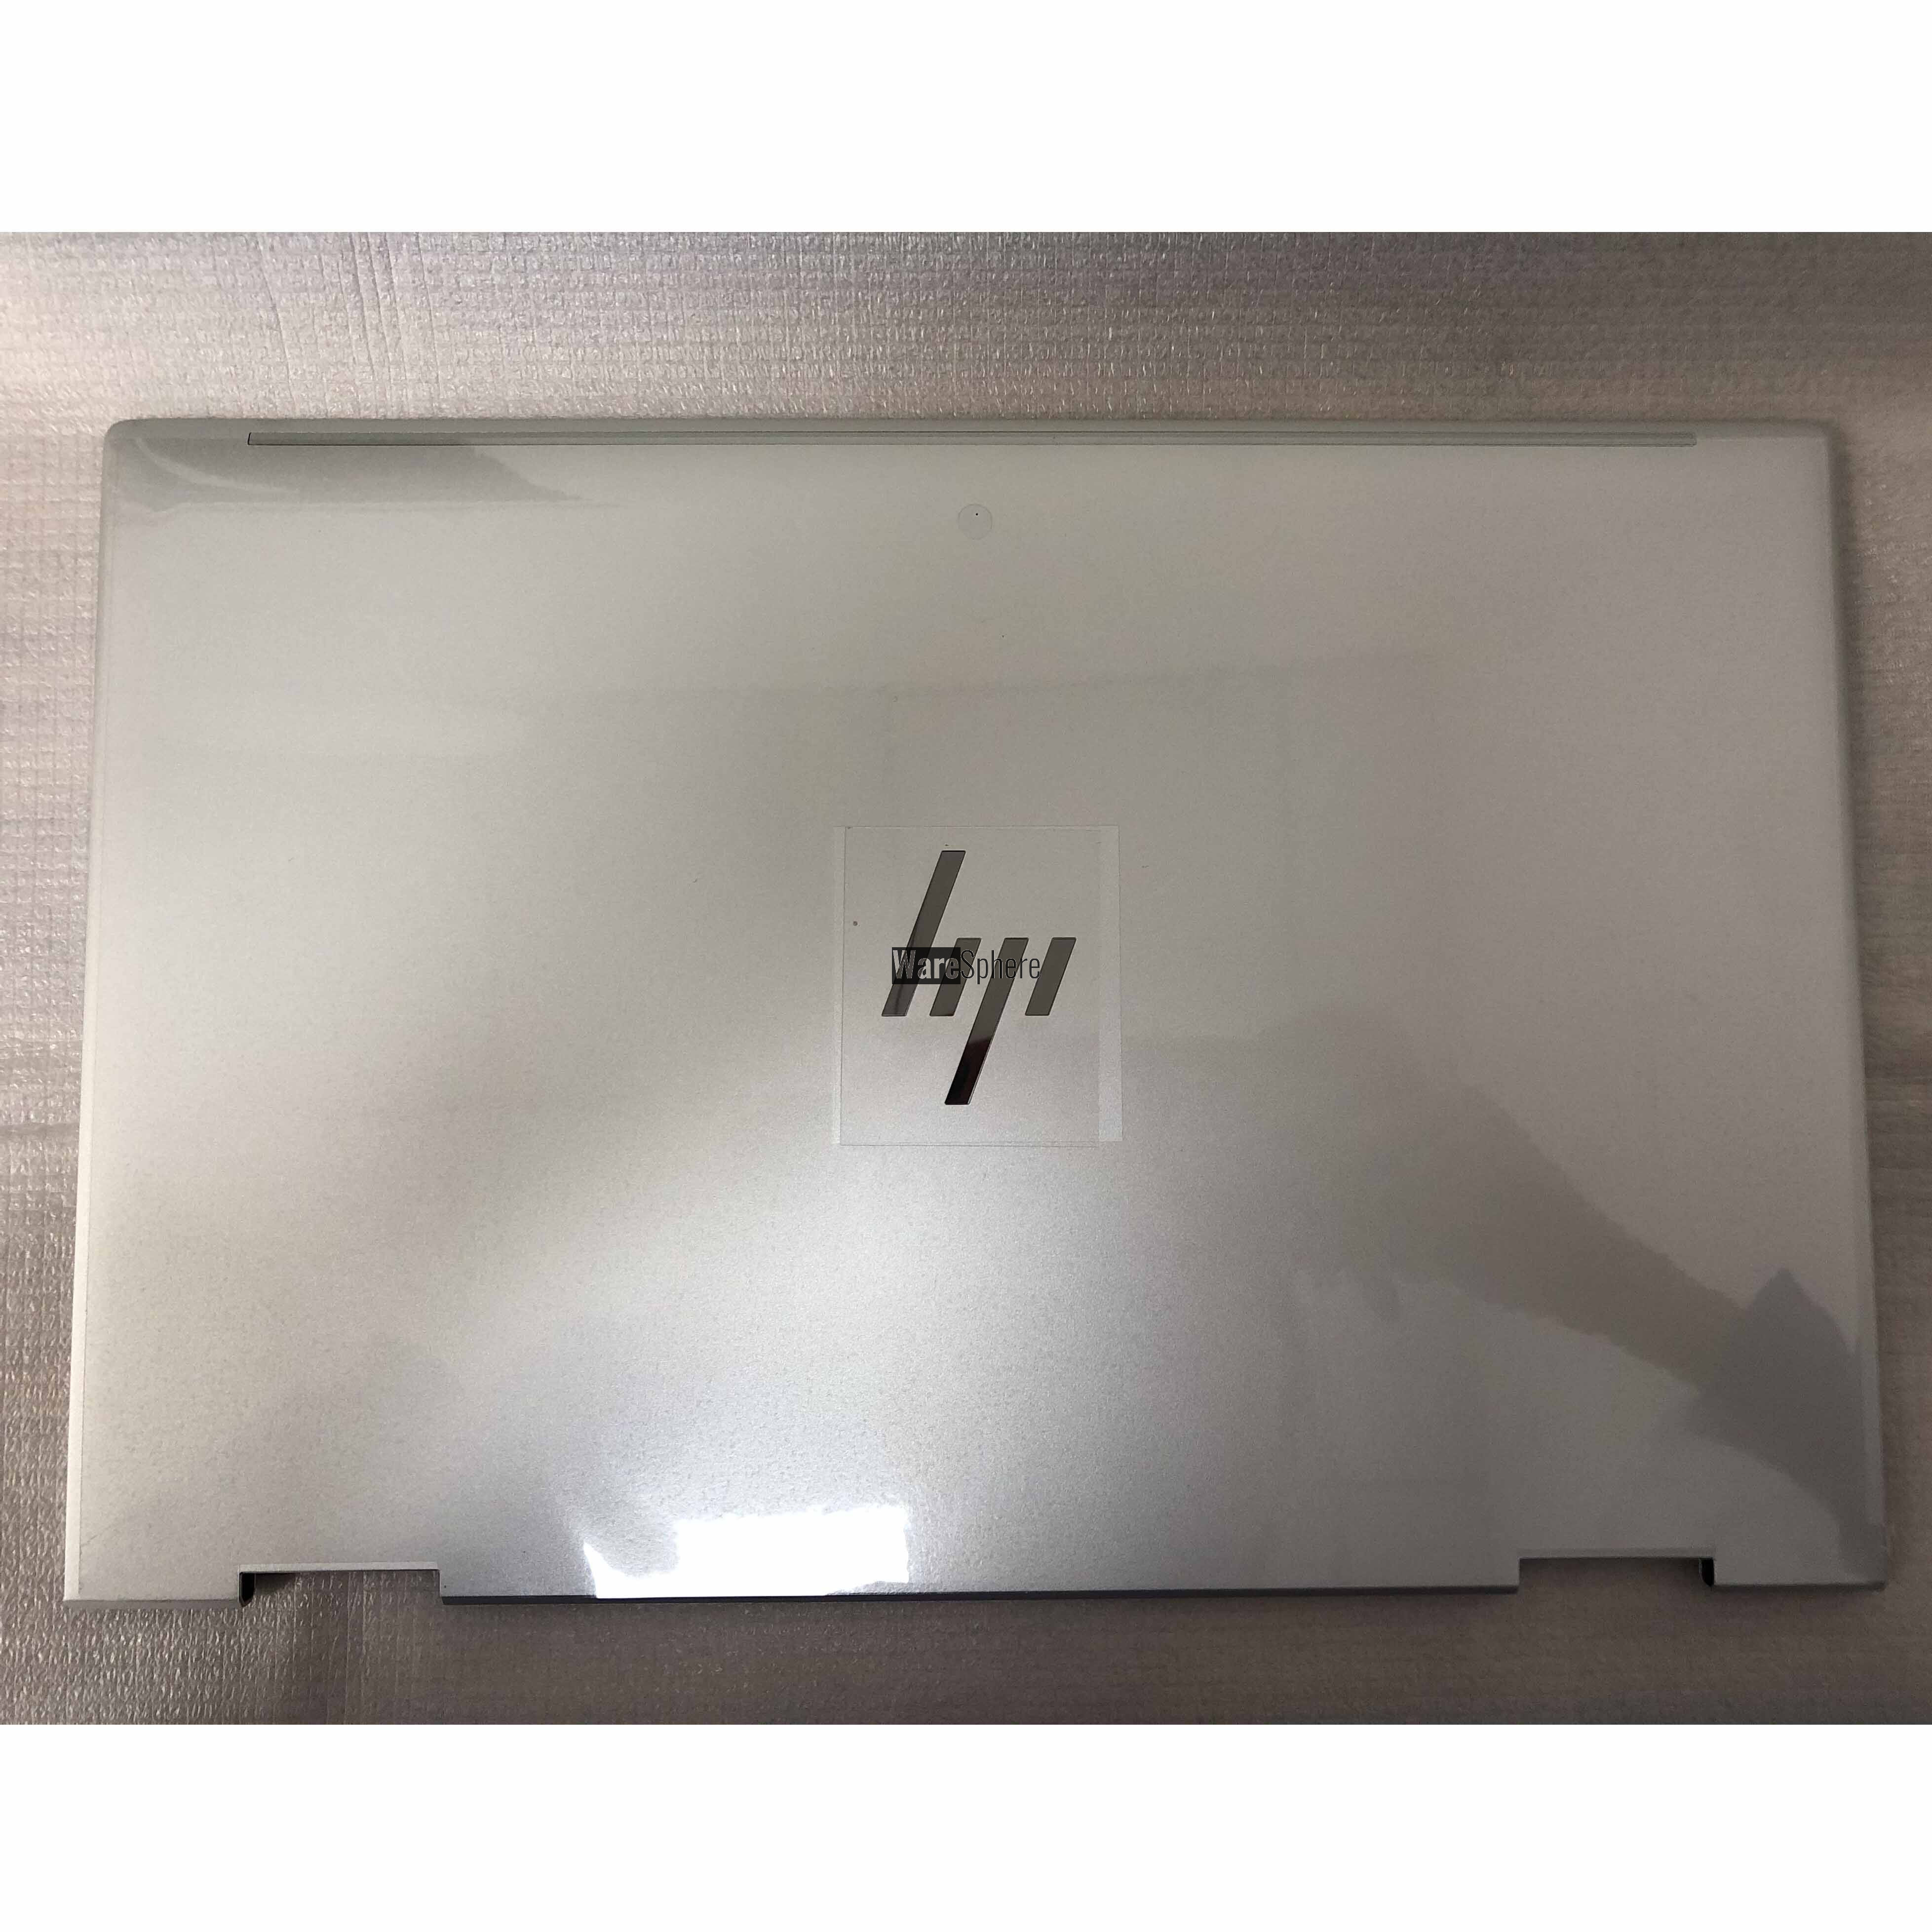 LCD Back Cover for HP EliteBook X360 830 G8 THICK NAG 6070B1859201 Silver